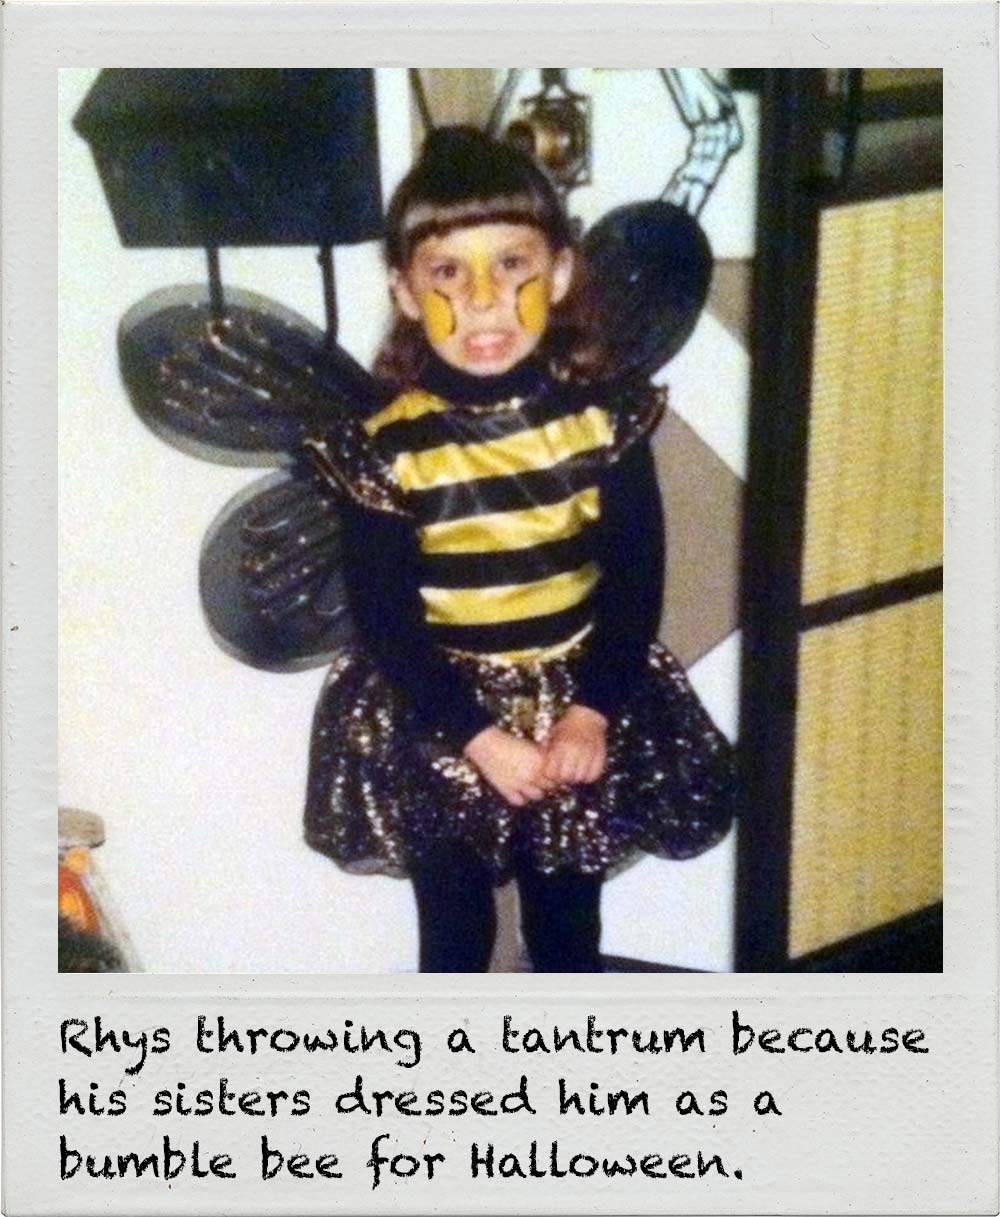 Rhys throwing a tantrum because his sisters dressed him as a bumble bee for Halloween.